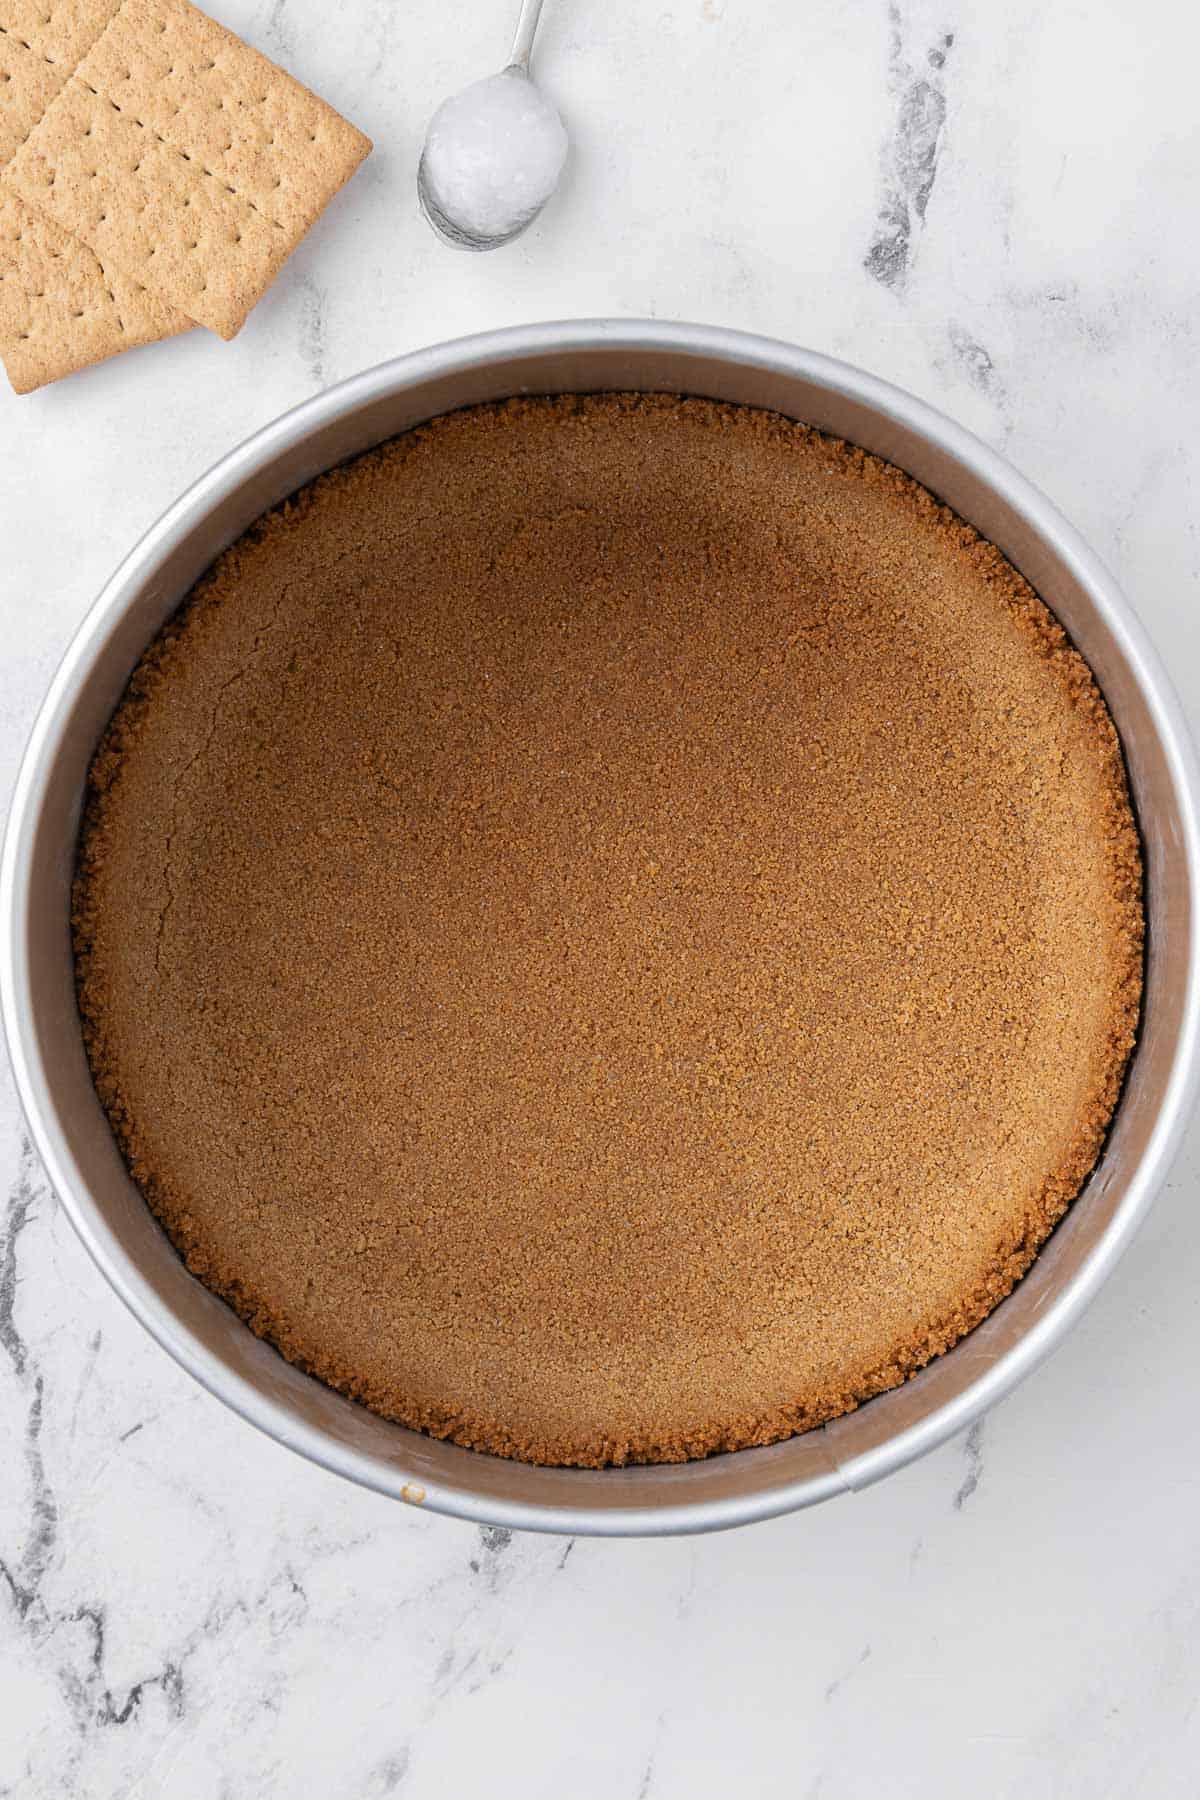 Coconut oil graham crack crust formed and toasted in a spring form pan.